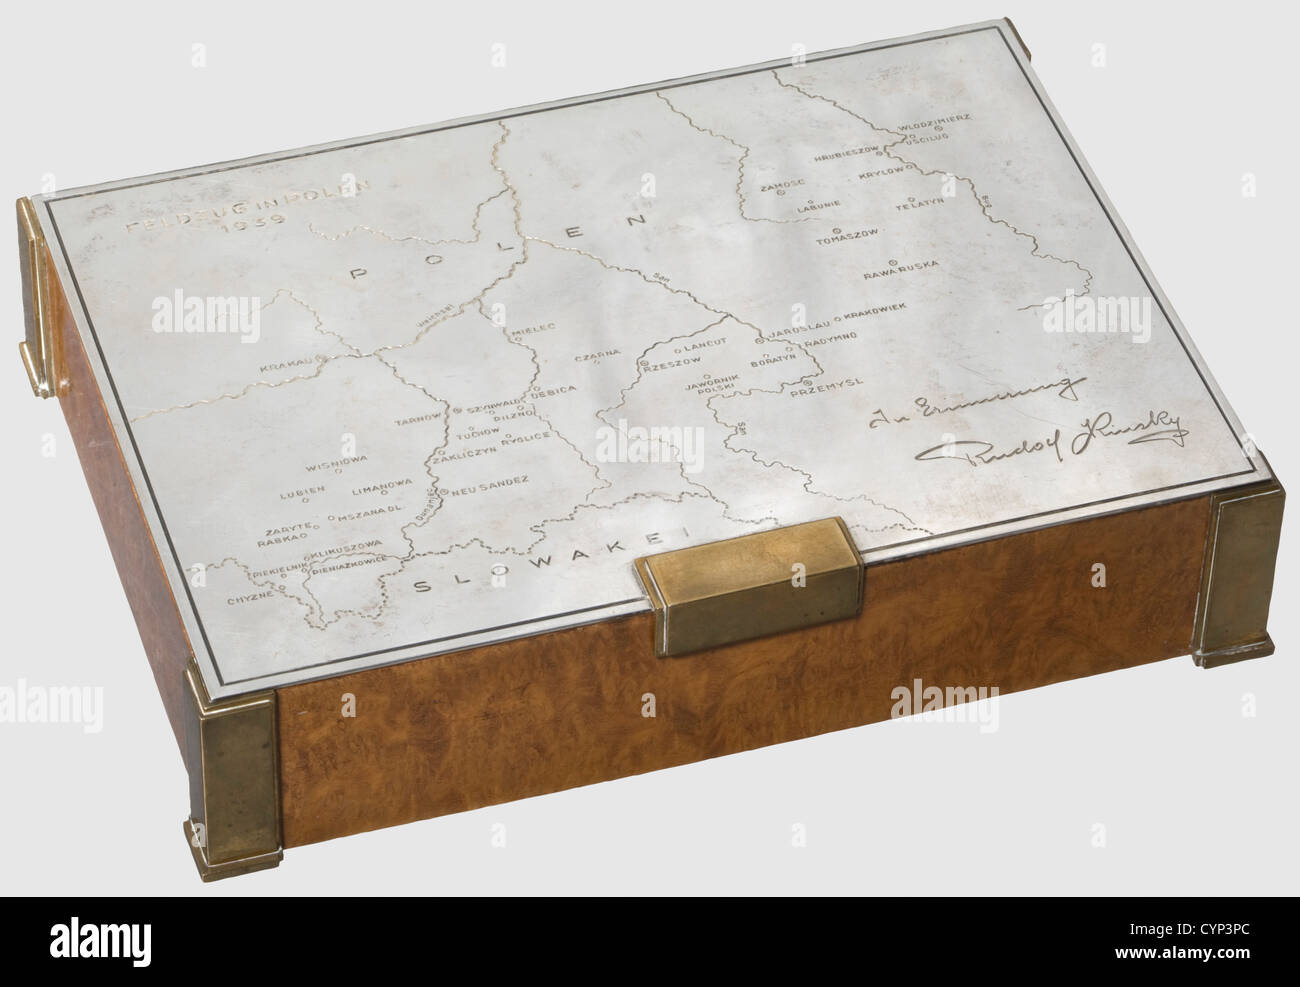 A silver presentation cigarette box for the 1939 Polish campaign,10th Mounted Rifles Regiment.Cedar with figured amboine veneer.Brass corners and feet.Silver lid engraved with a map of Poland and 'Feldzug in Polen 1939'(Campaign in Poland 1939)on the upper left,and 'In Erinnerung Rudolf Kinsky'(In Memory - Rudolf Kinsky)at the lower right.A detailed enumeration of the(transl.)'Movements and Actions Fought by the 10th Mounted Rifle Regiment from 1 September to 24 September 1939' inside.The silversmith's signature 'Carl Hiess Wien I',the hallmark '9,Additional-Rights-Clearences-Not Available Stock Photo